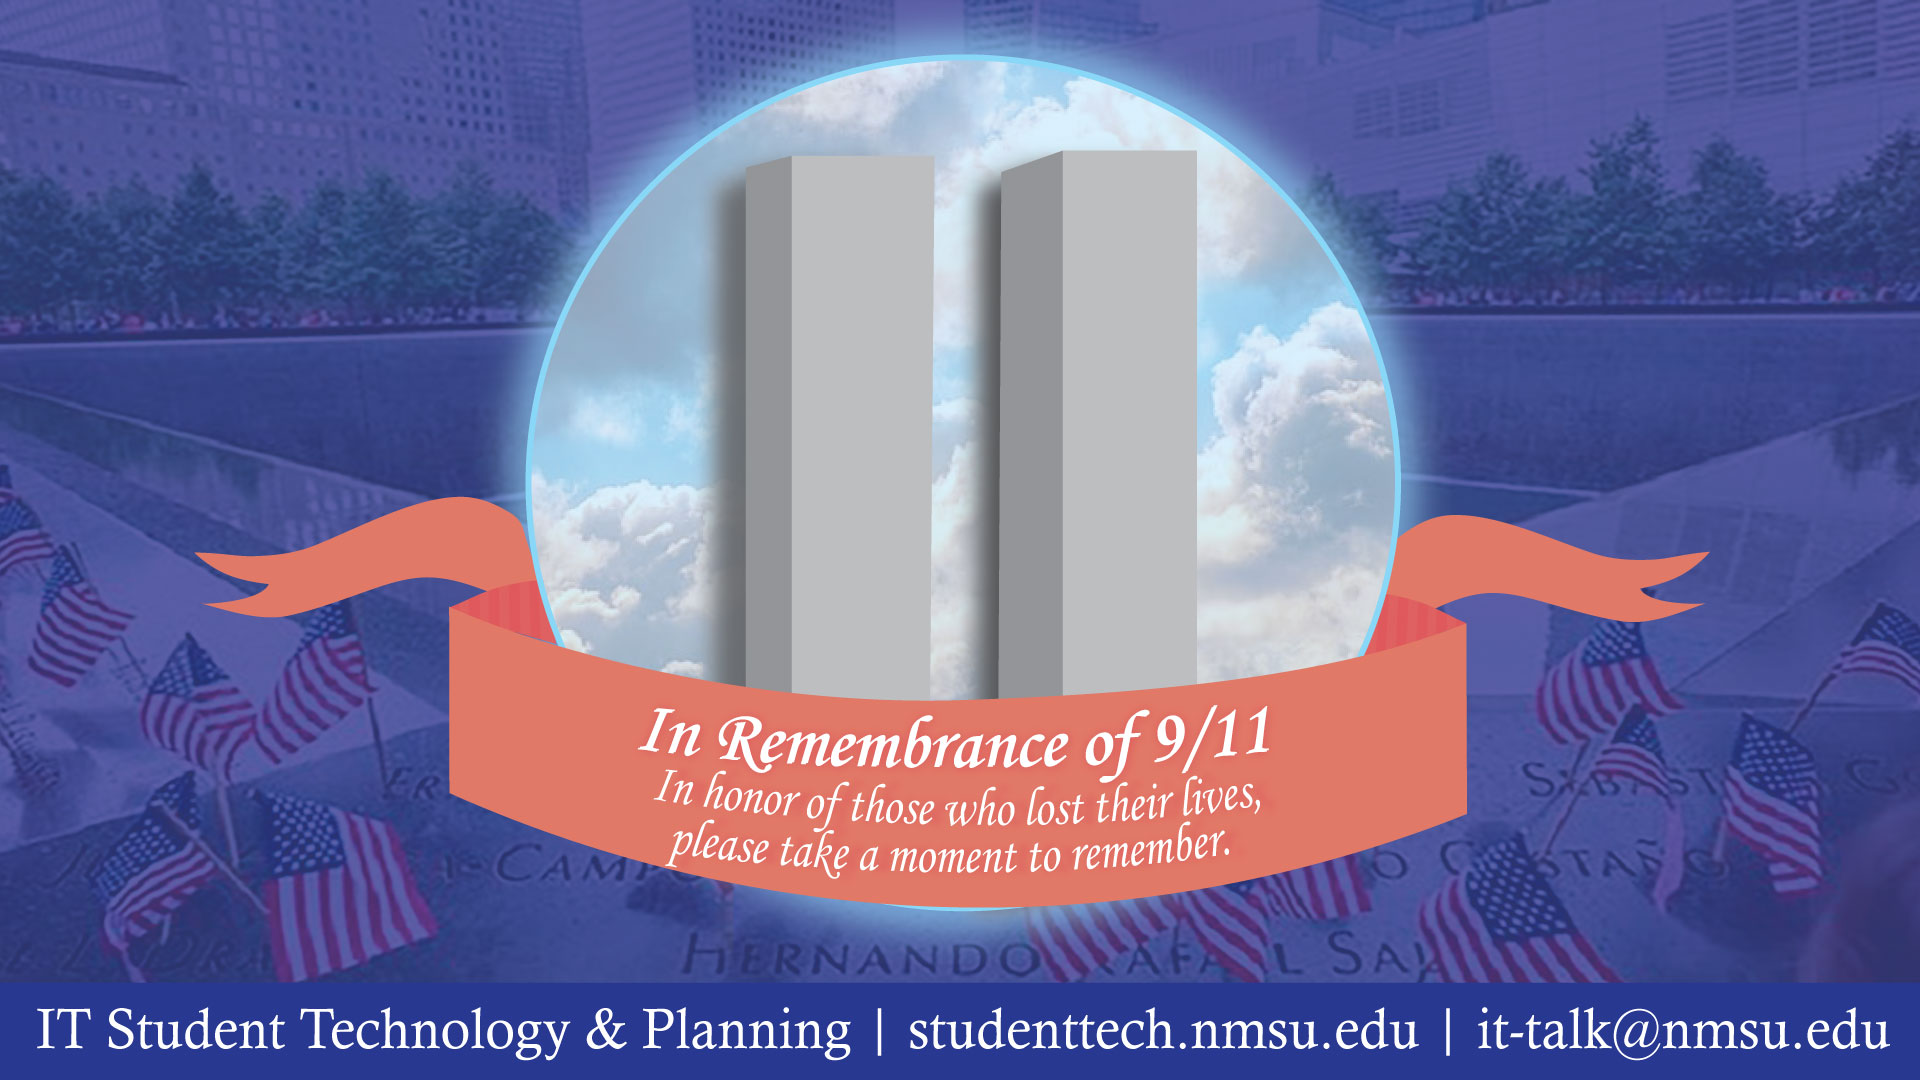 In remembrance of 9/11. In honor of those who lost their lives, please take a moment to remember.